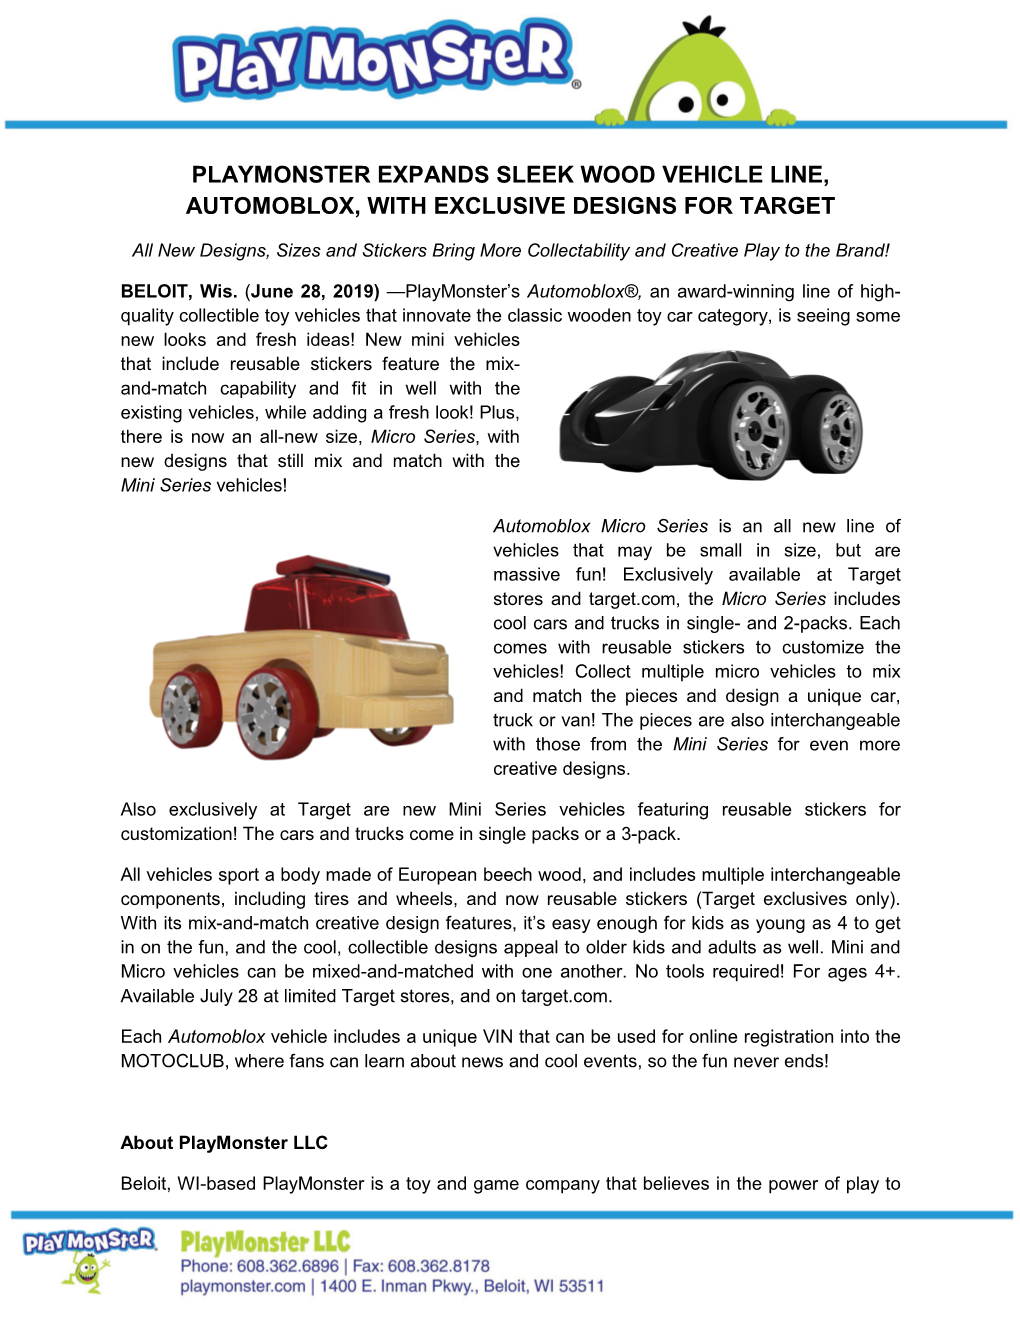 Playmonster Expands Sleek Wood Vehicle Line, Automoblox, with Exclusive Designs for Target